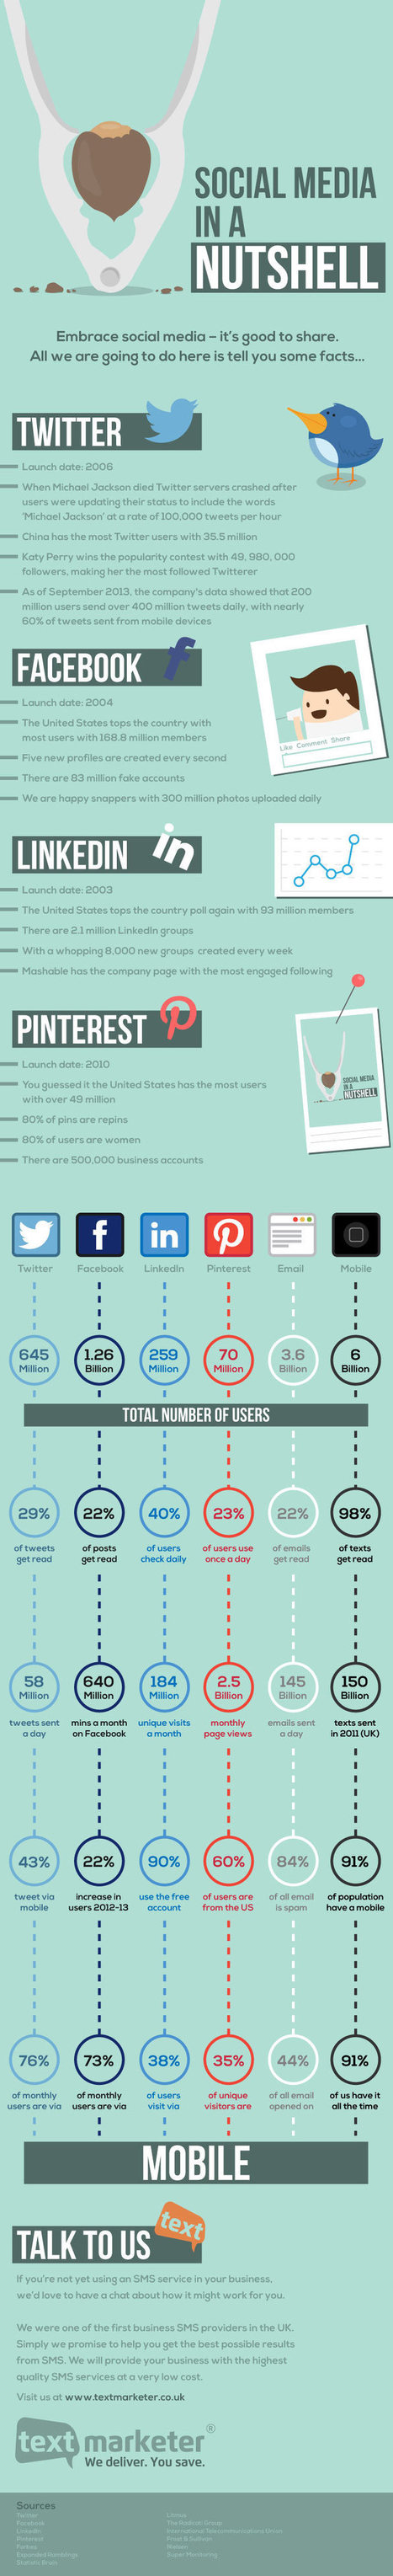 Social Media in a Nutshell an infographic | Public Relations & Social Marketing Insight | Scoop.it